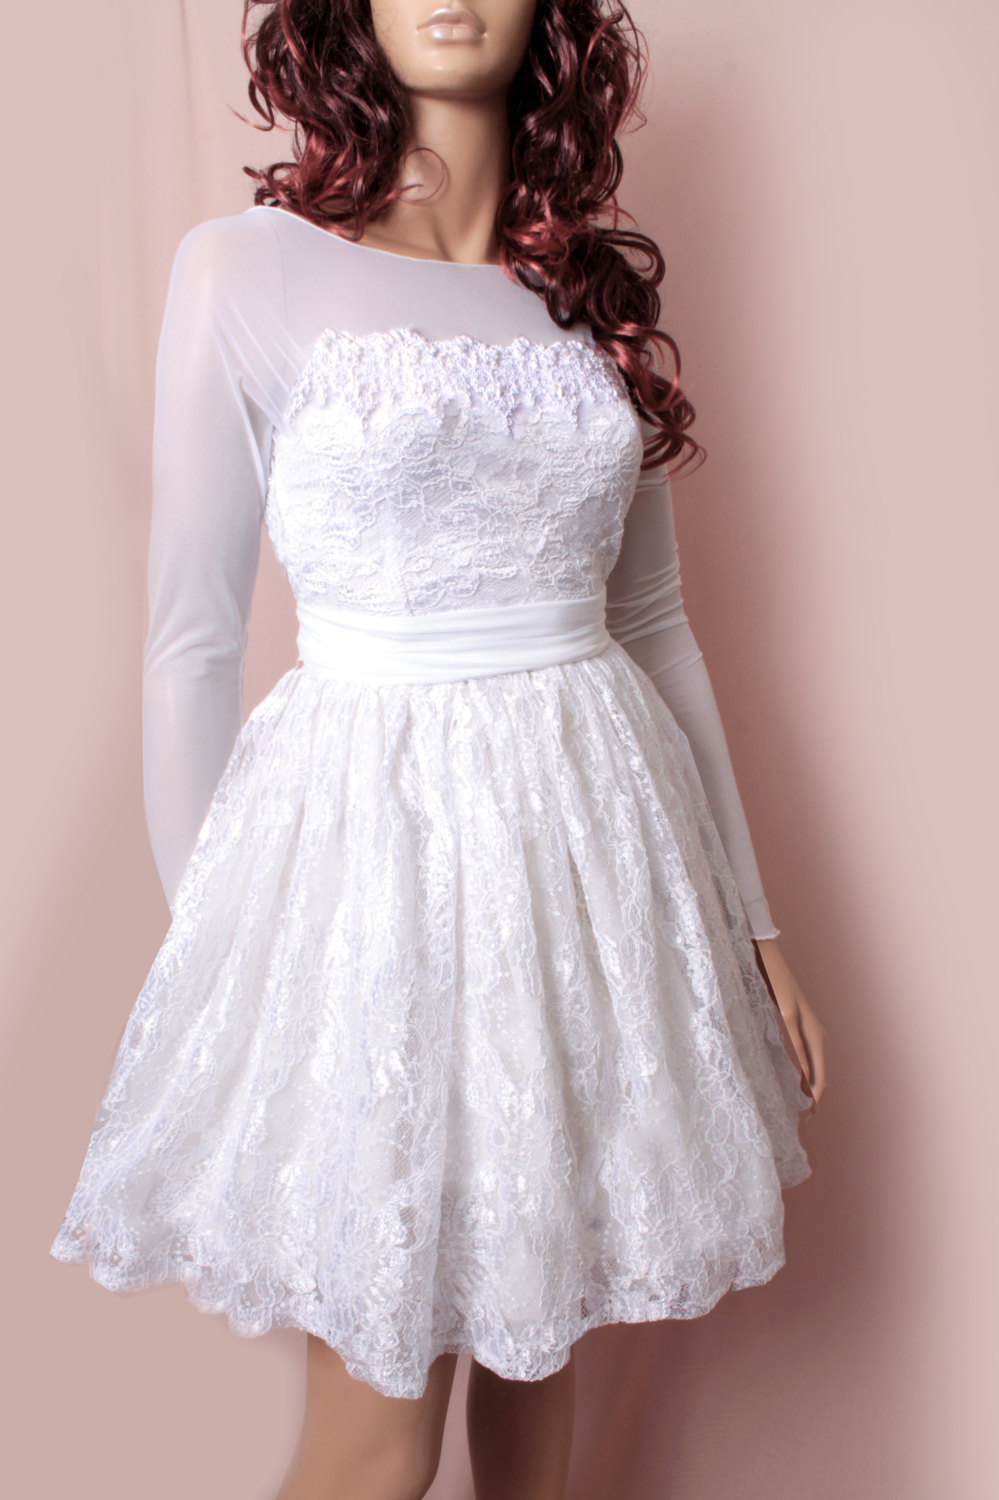 Plus Size Short Embroidery Lace And Lulle Wedding Dress // Long Sleeves Dress / Custom Made/ Bridal Gown